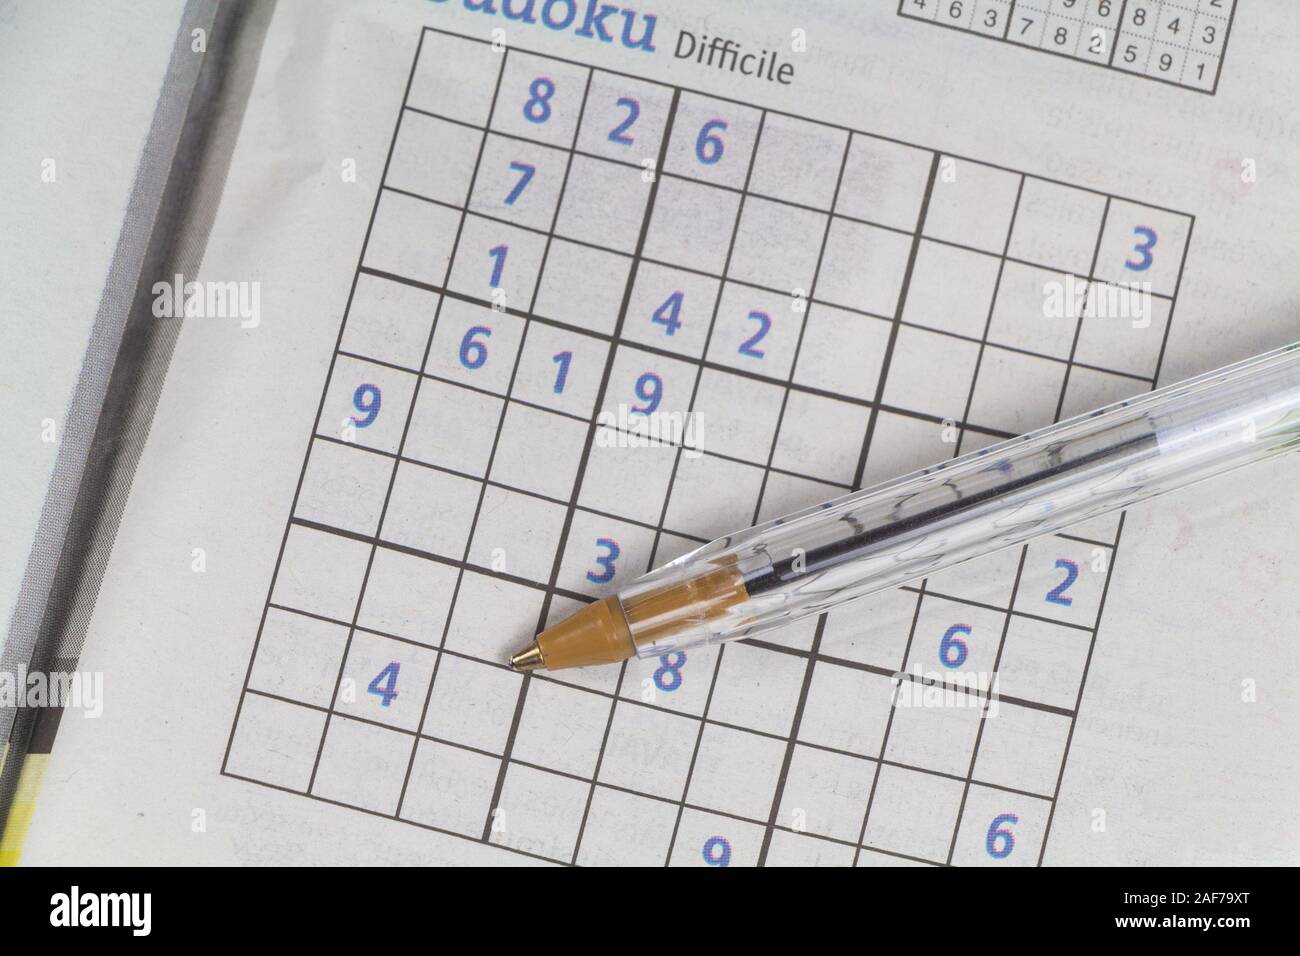 Sudoku game in a newspaper and pen Stock Photo